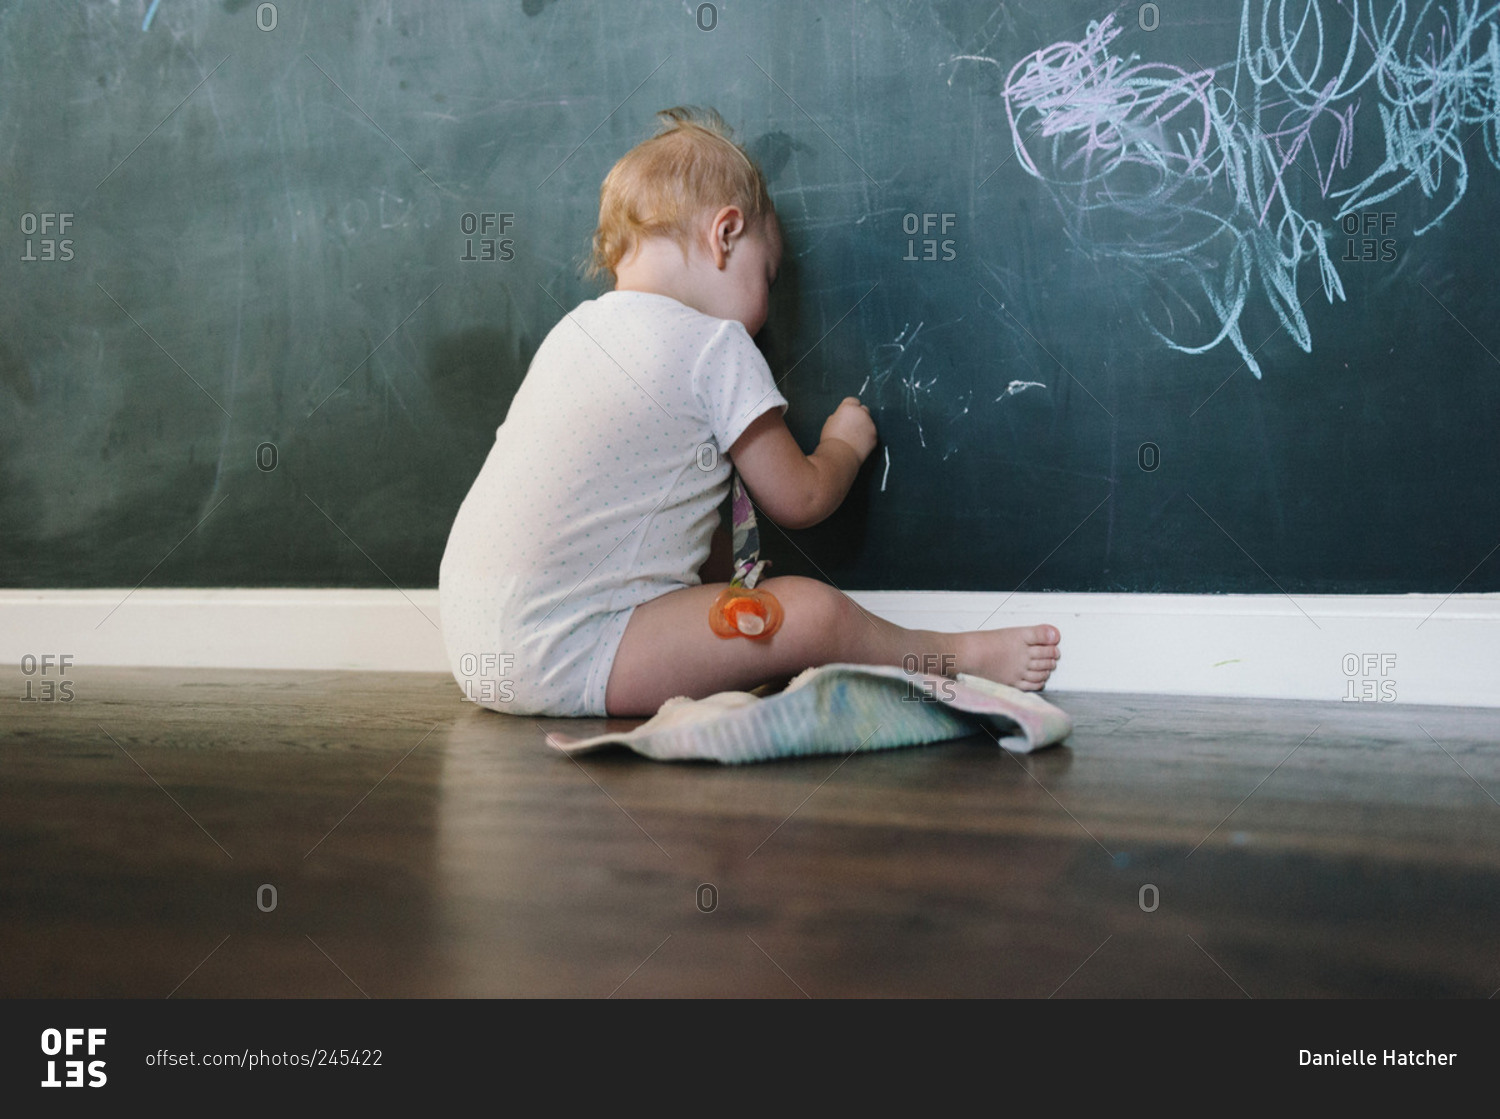 A baby draws on a wall with chalk